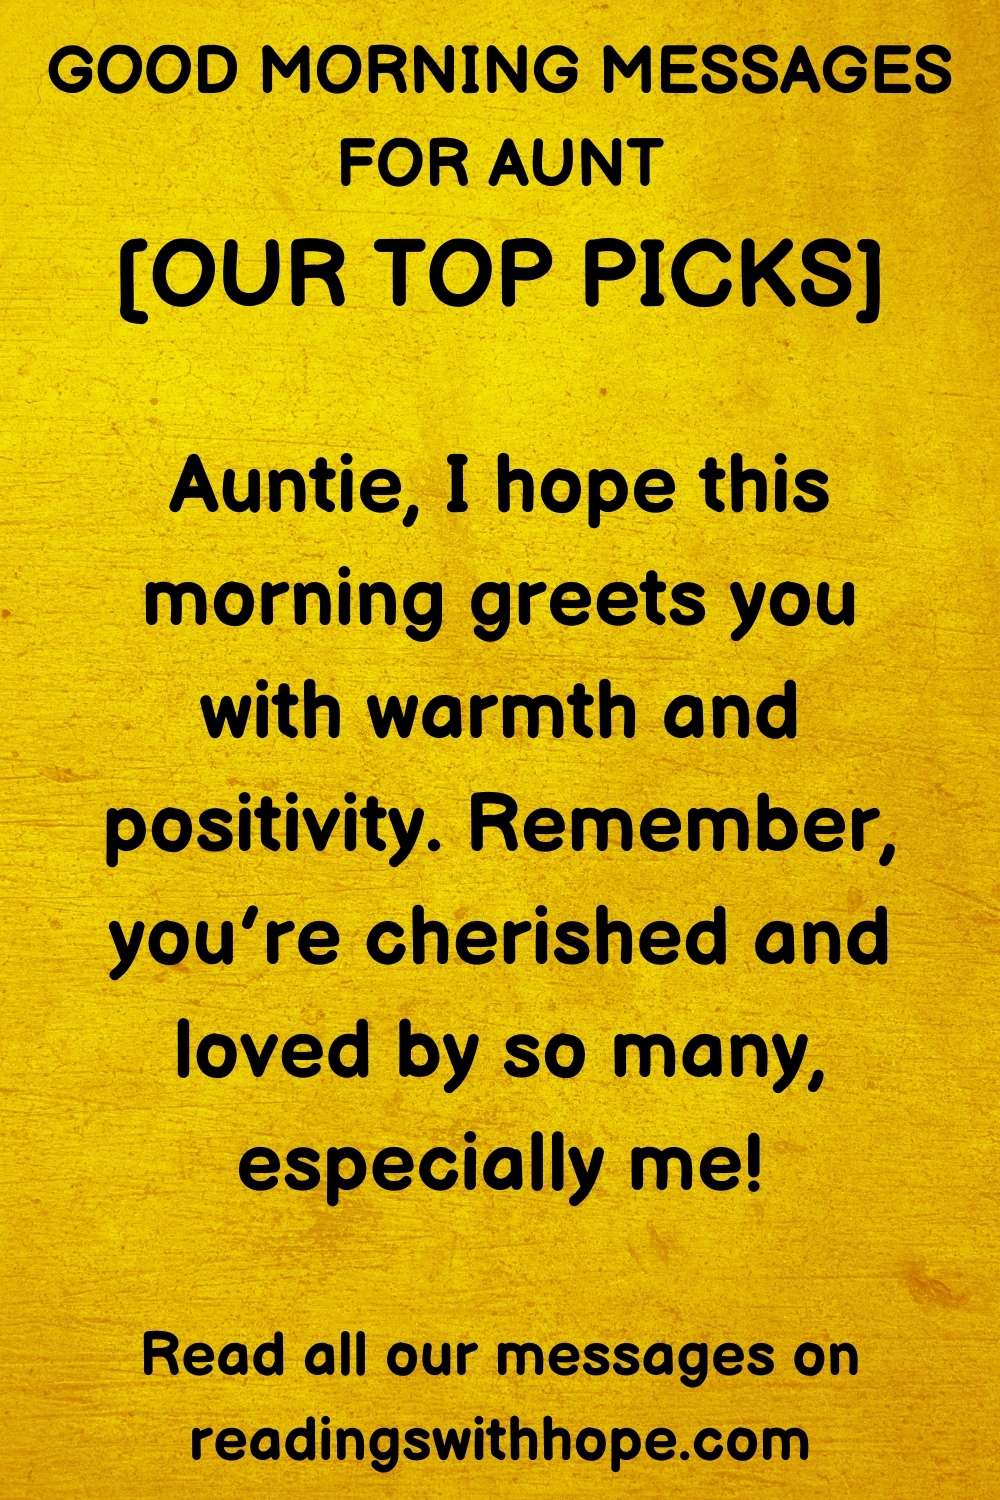 good morning message for aunt that says Auntie, I hope this morning greets you with warmth and positivity. Remember, you’re cherished and loved by so many, especially me!